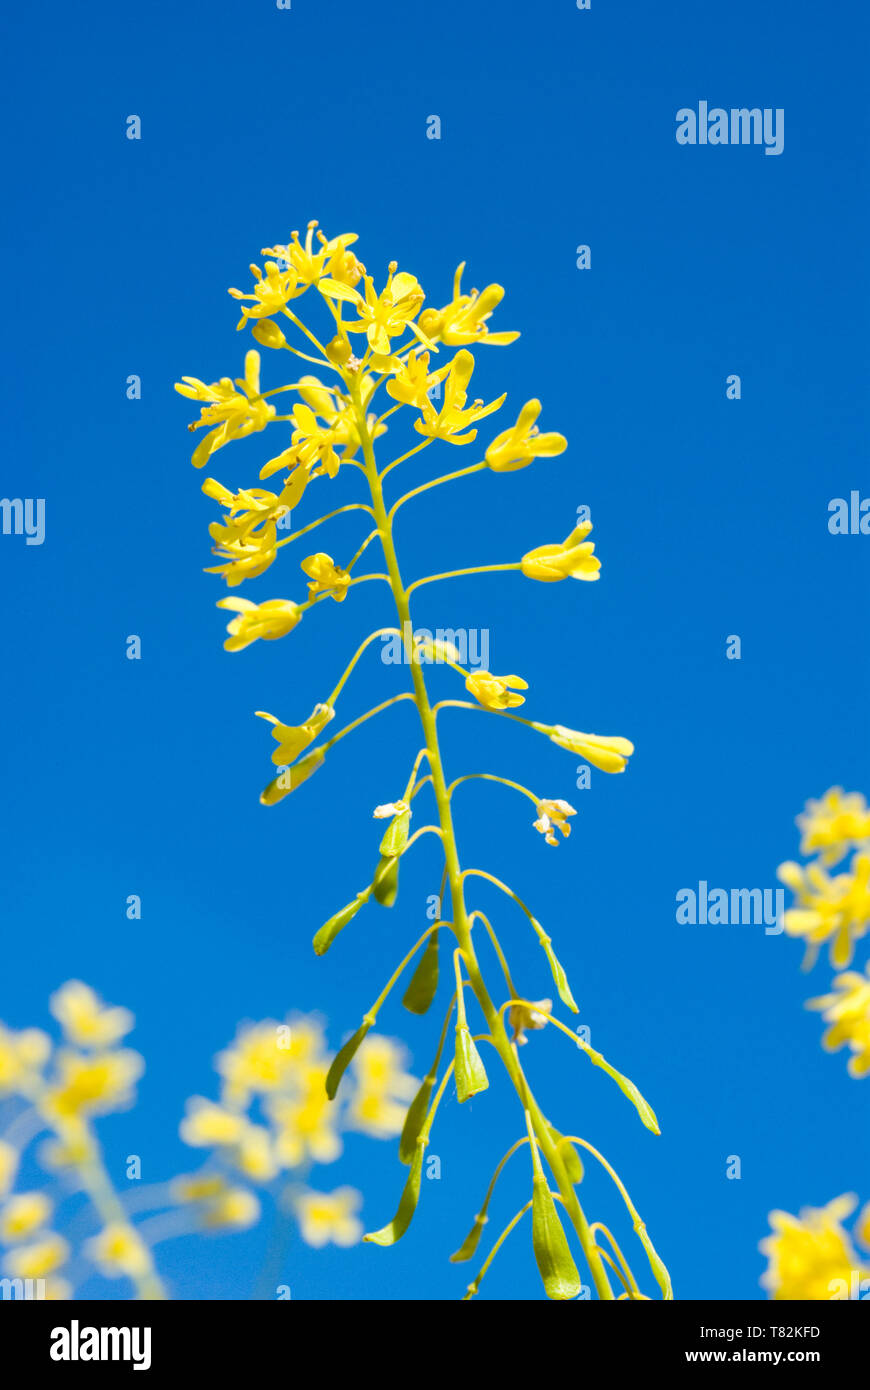 Woad plant against Blue Sky Stock Photo